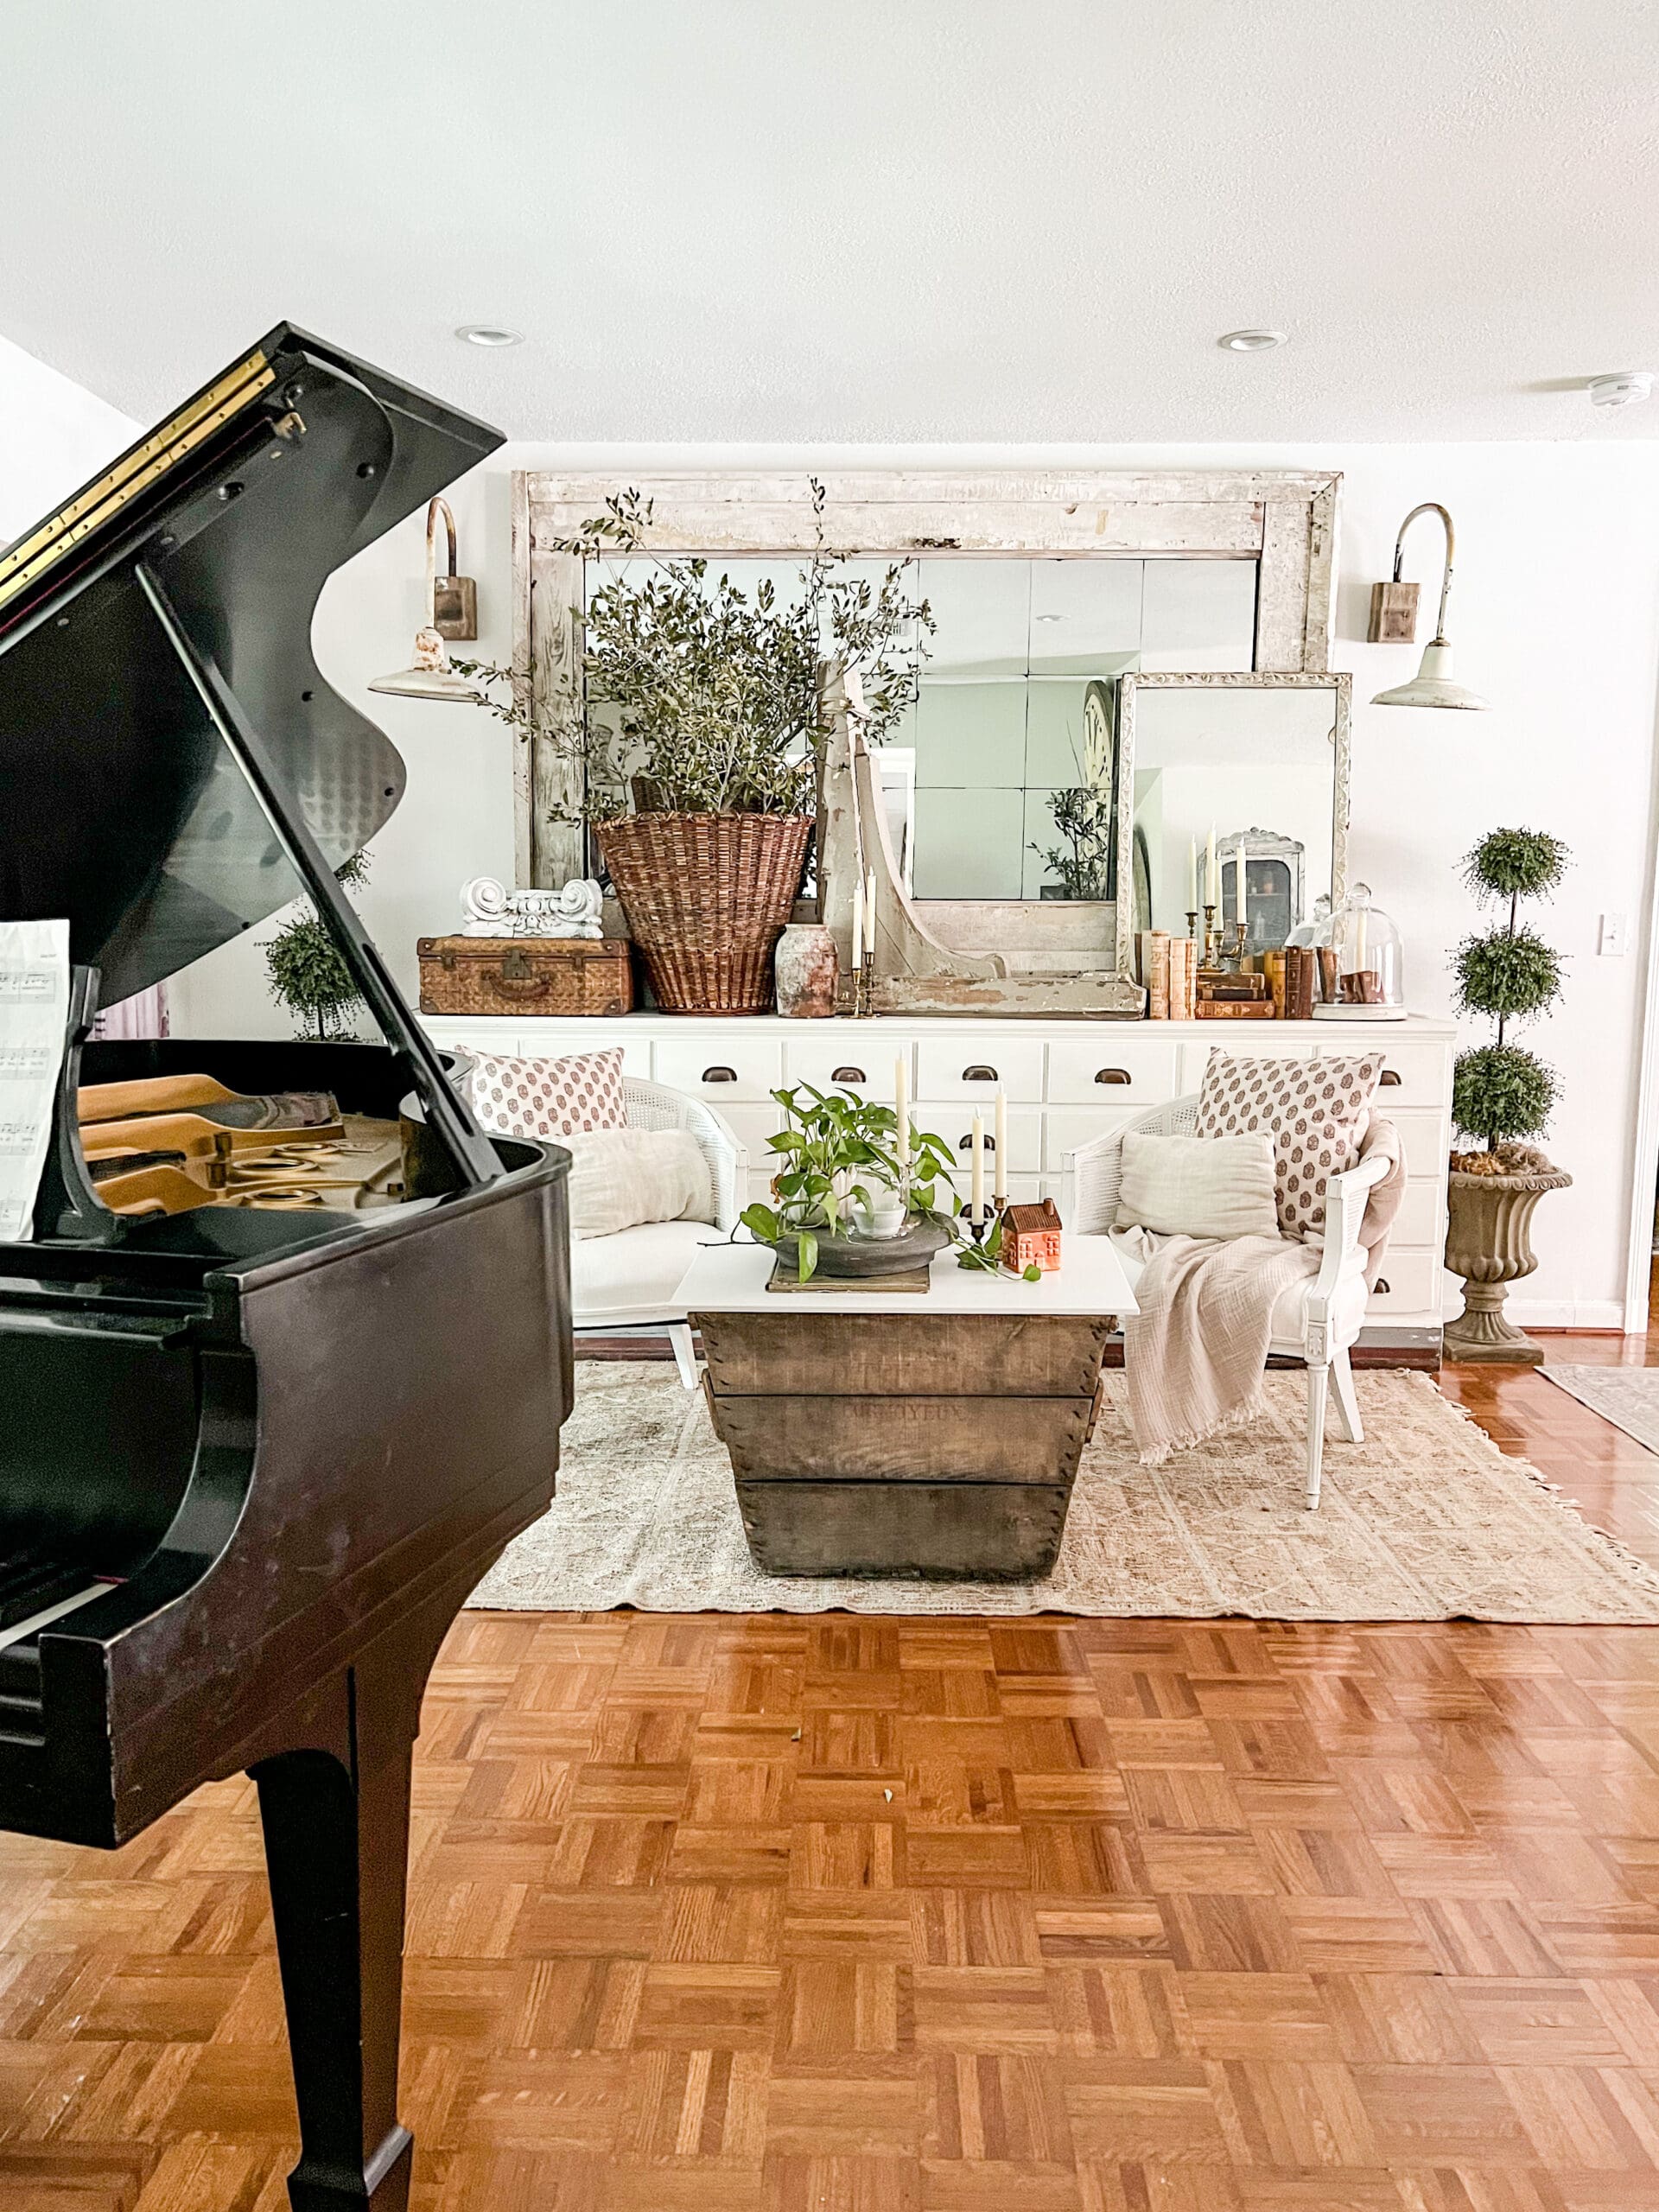 Music room with grand piano & large french basket full of trimmings from yard trees